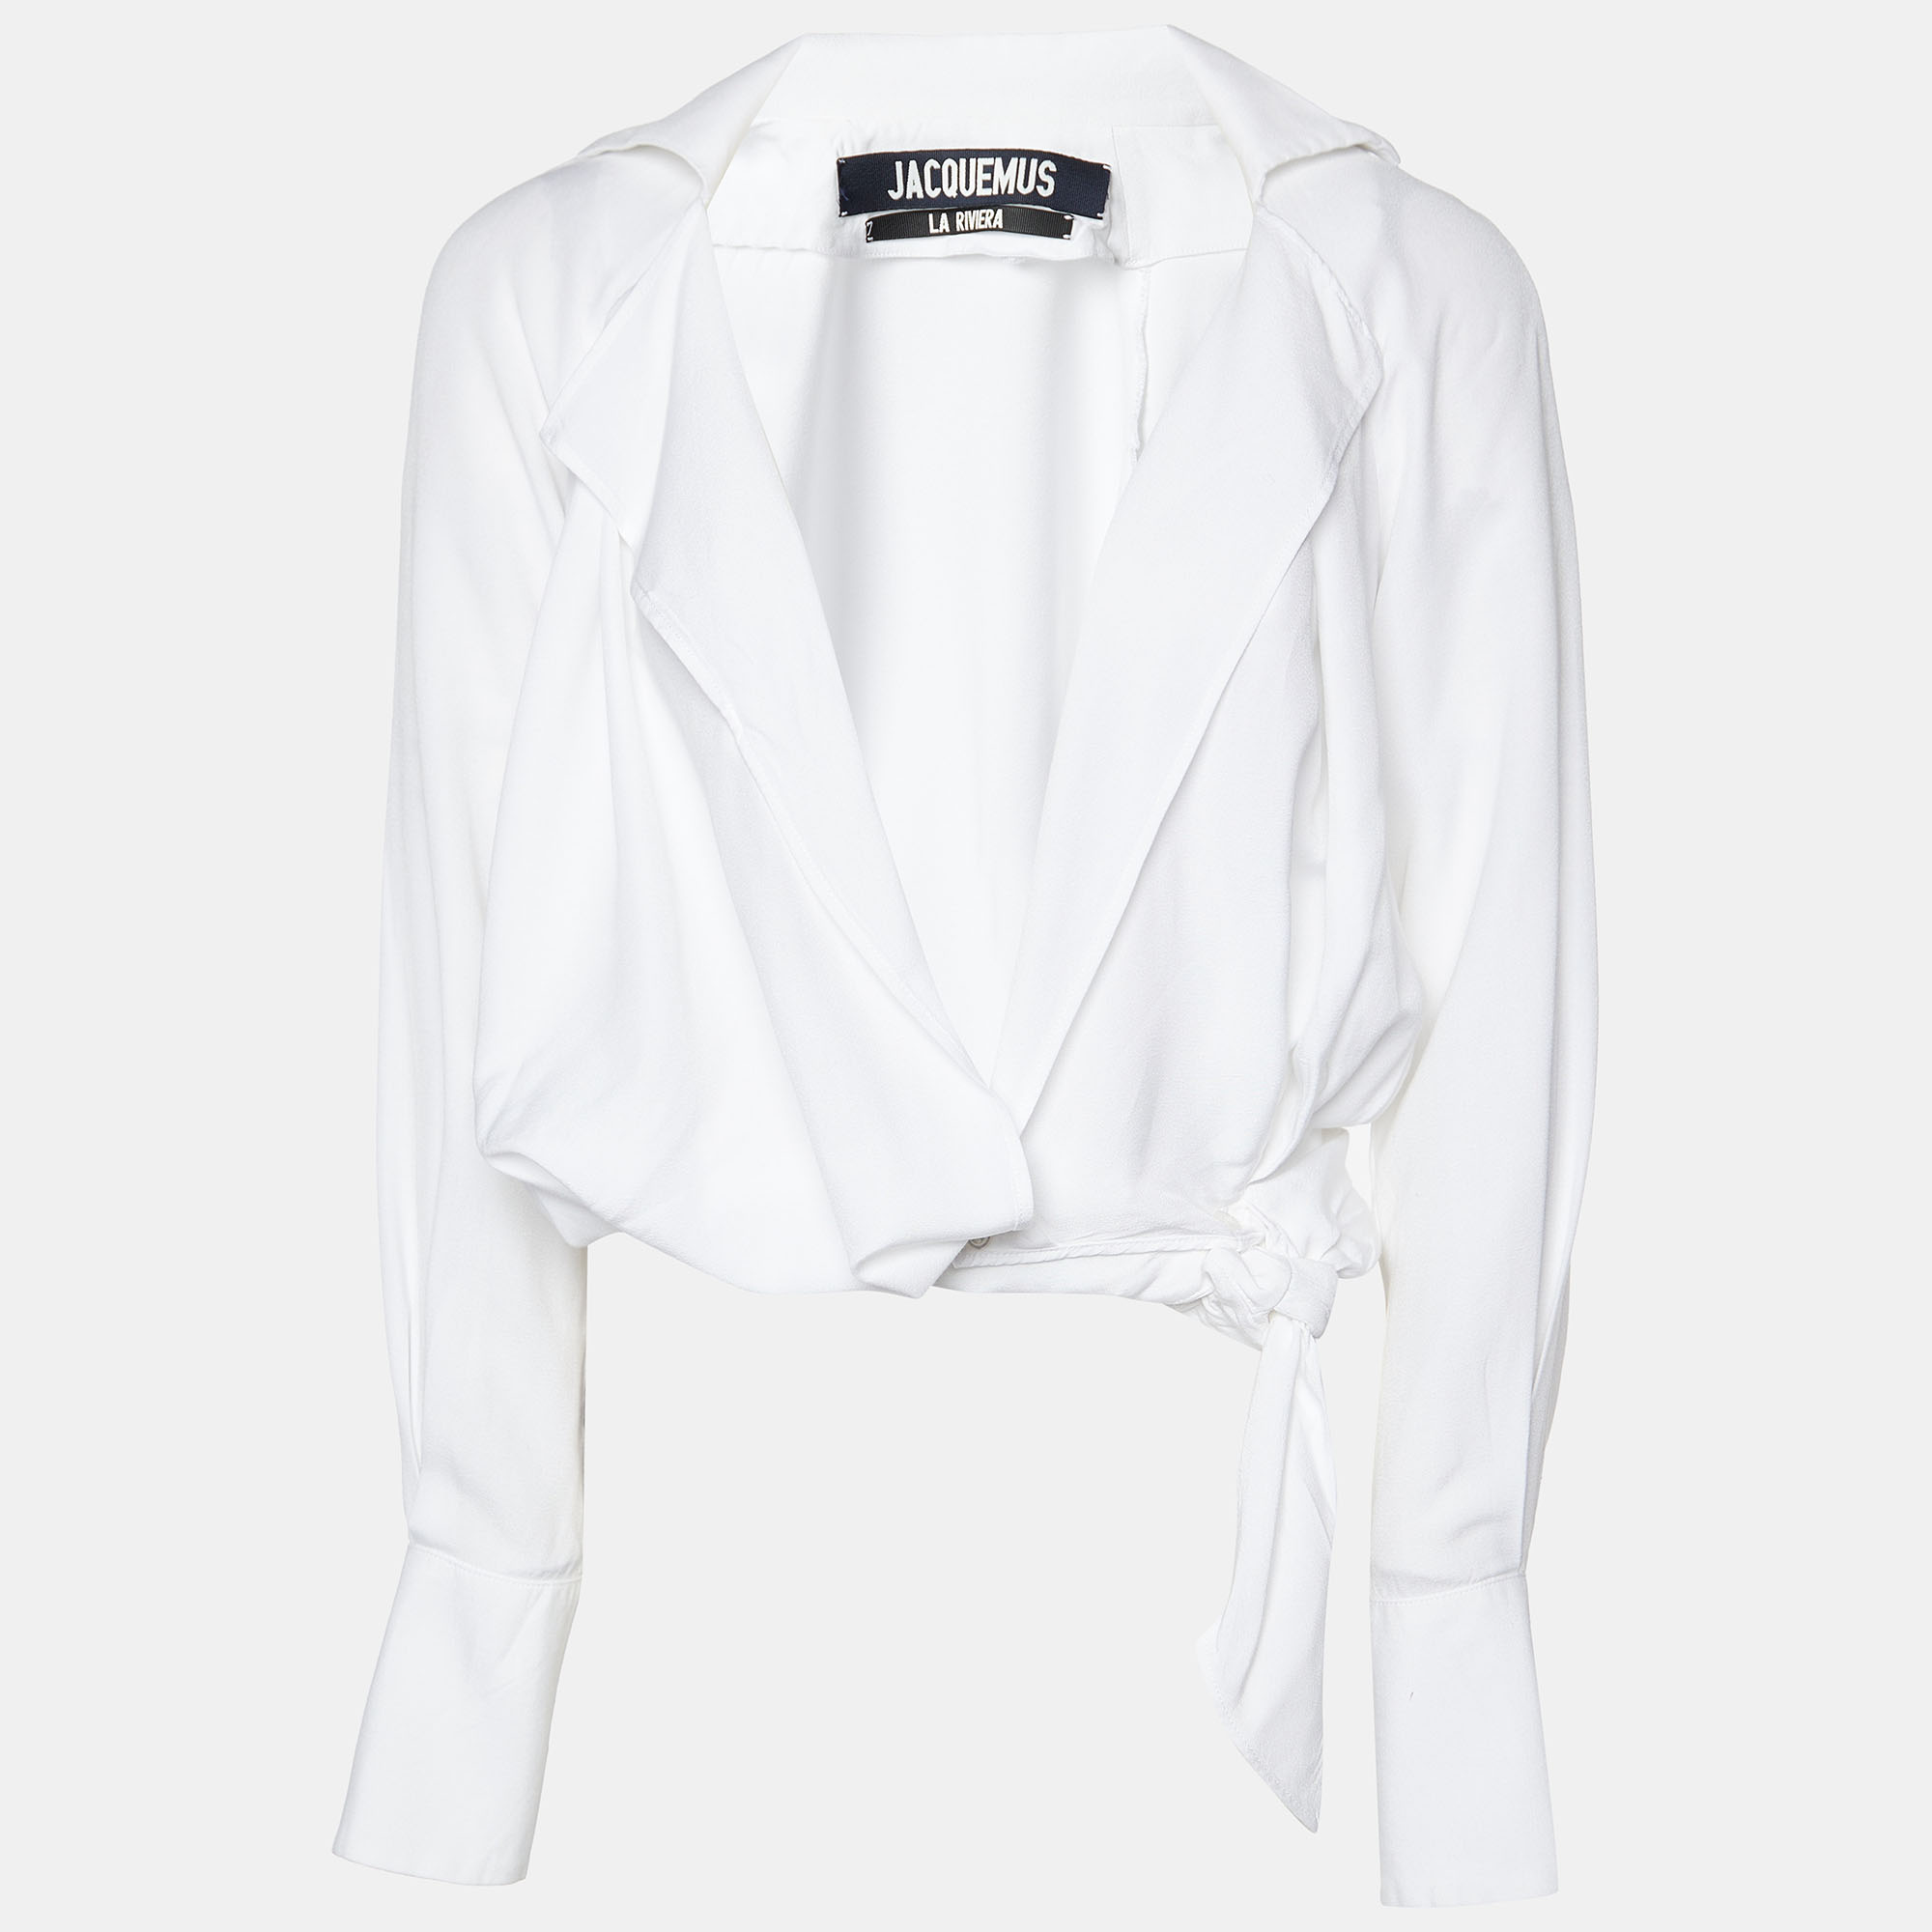 Pre-owned Jacquemus La Riviera White Tie Detail Wrapped Crop Top S